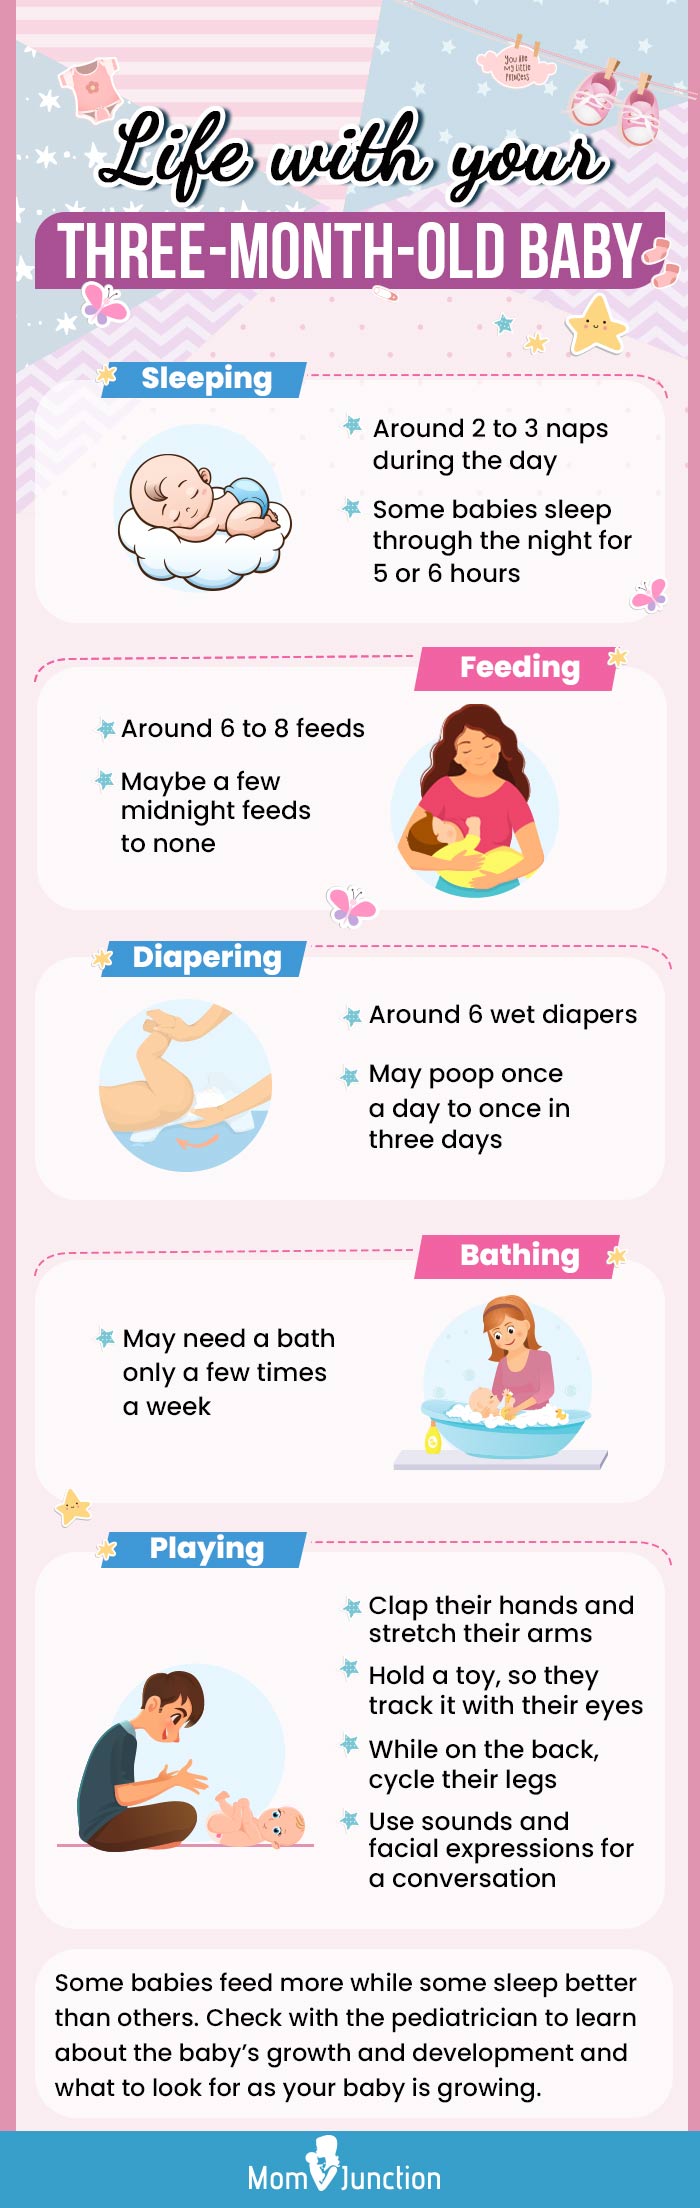 life with your three month old baby (infographic)